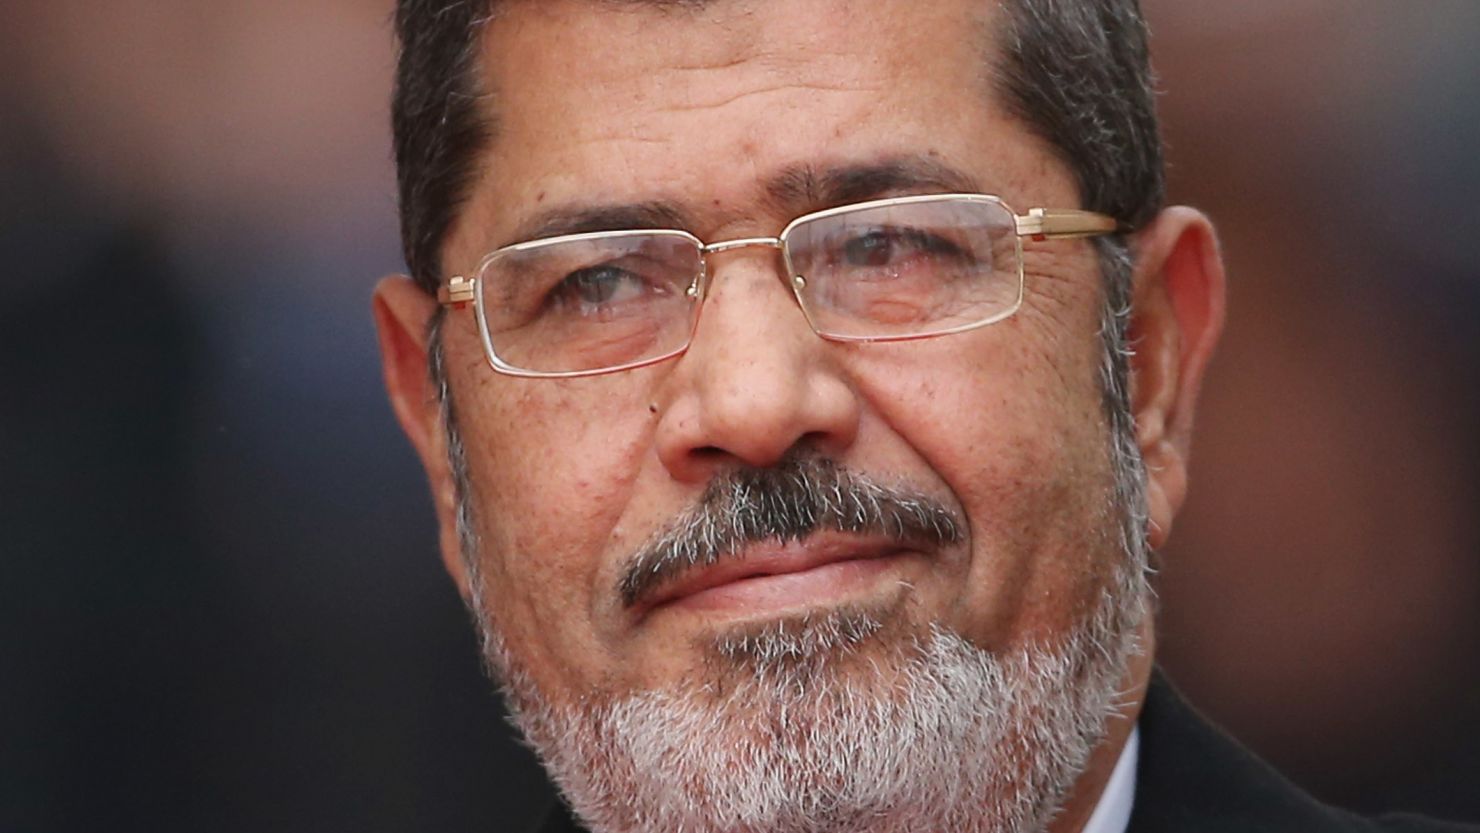 Mohamed Morsy, Egypt's first democratically elected President, was ousted in a military coup in 2013.